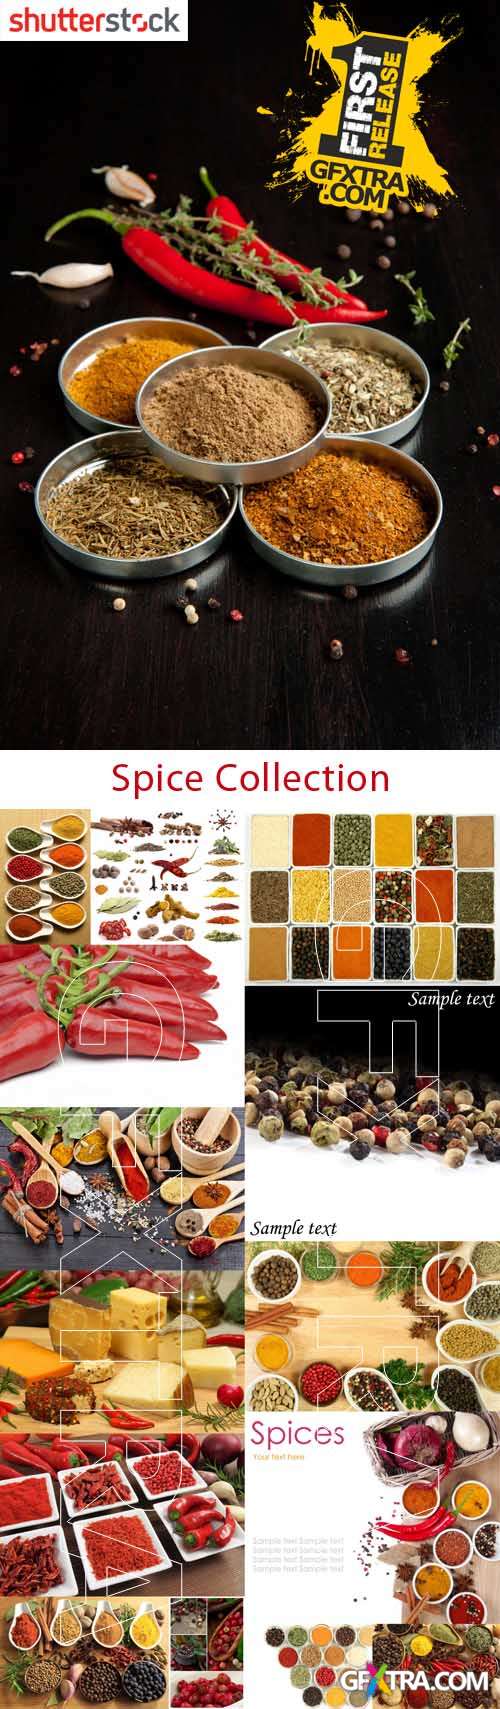 Spice Collection - HQ Stock Photo